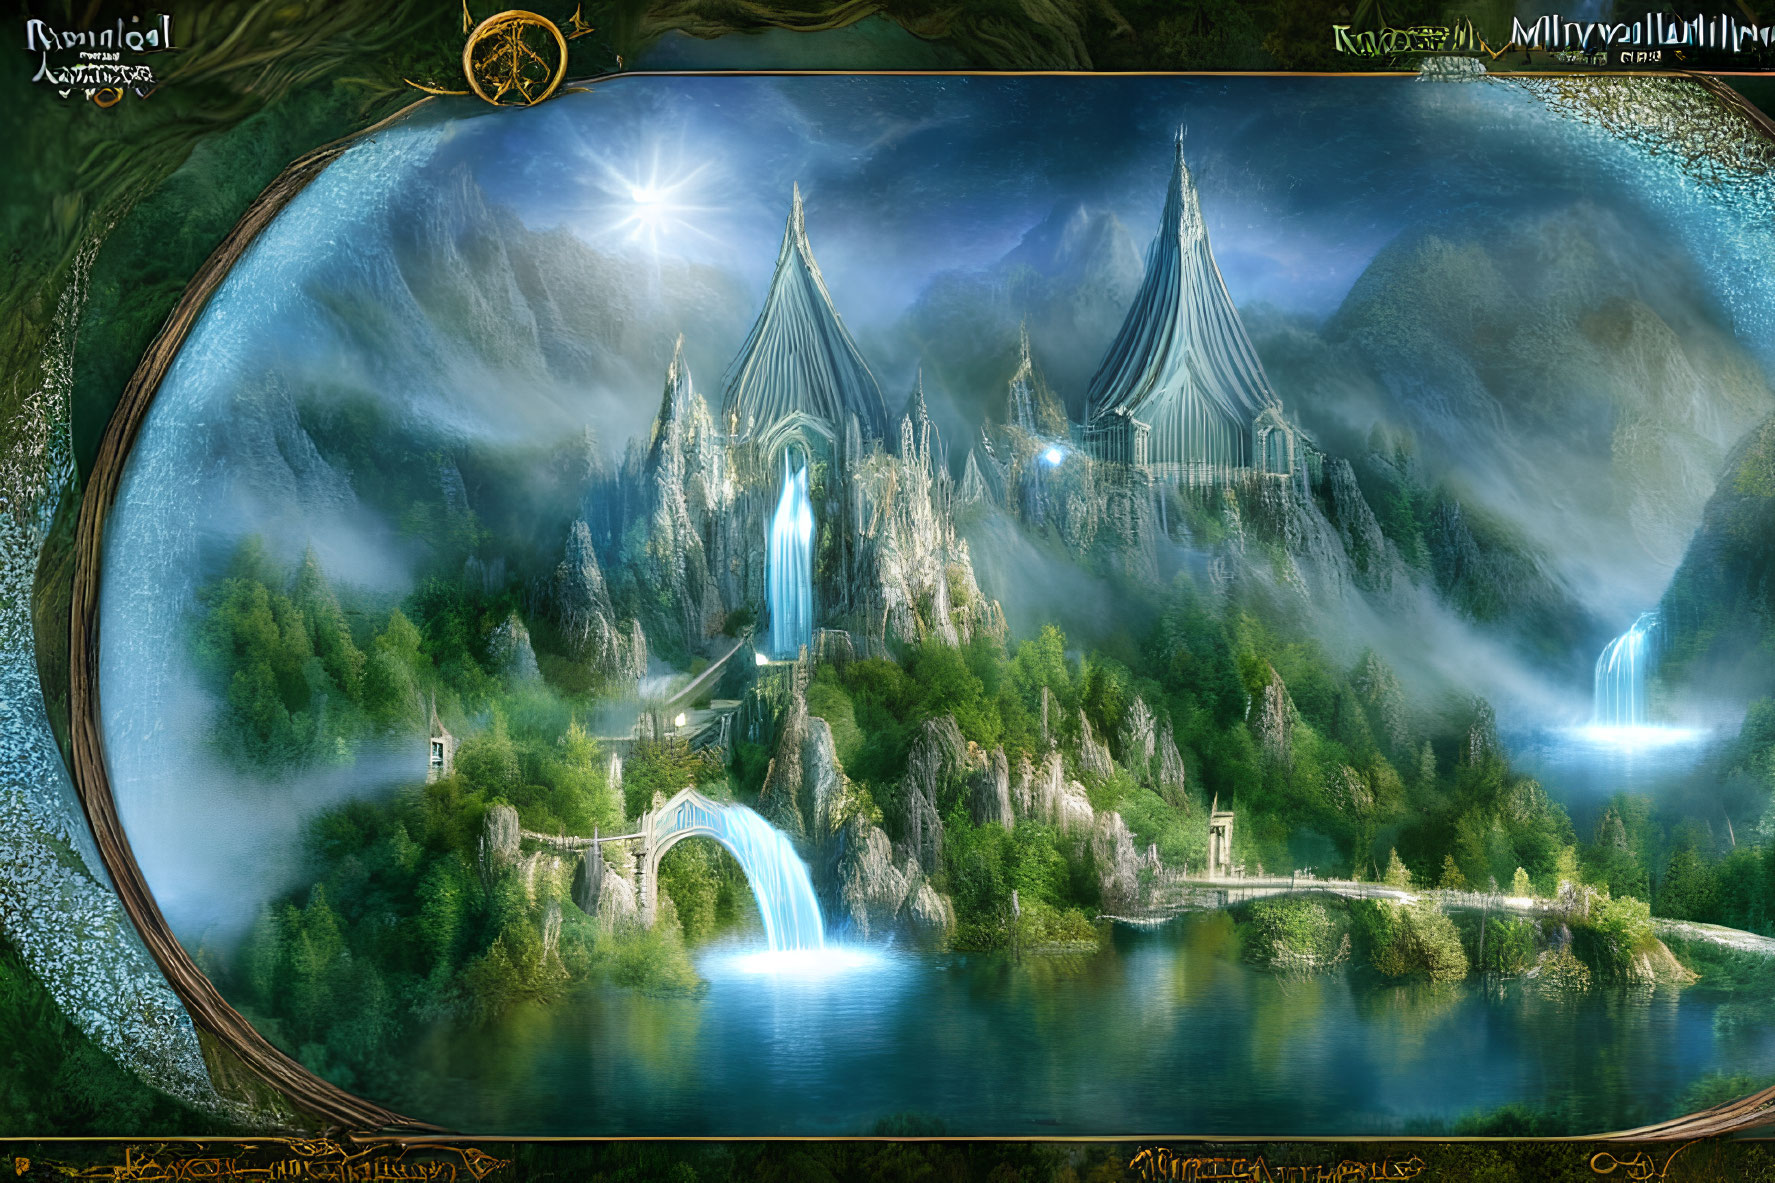 Ethereal castle in fantasy landscape with mountains and waterfalls